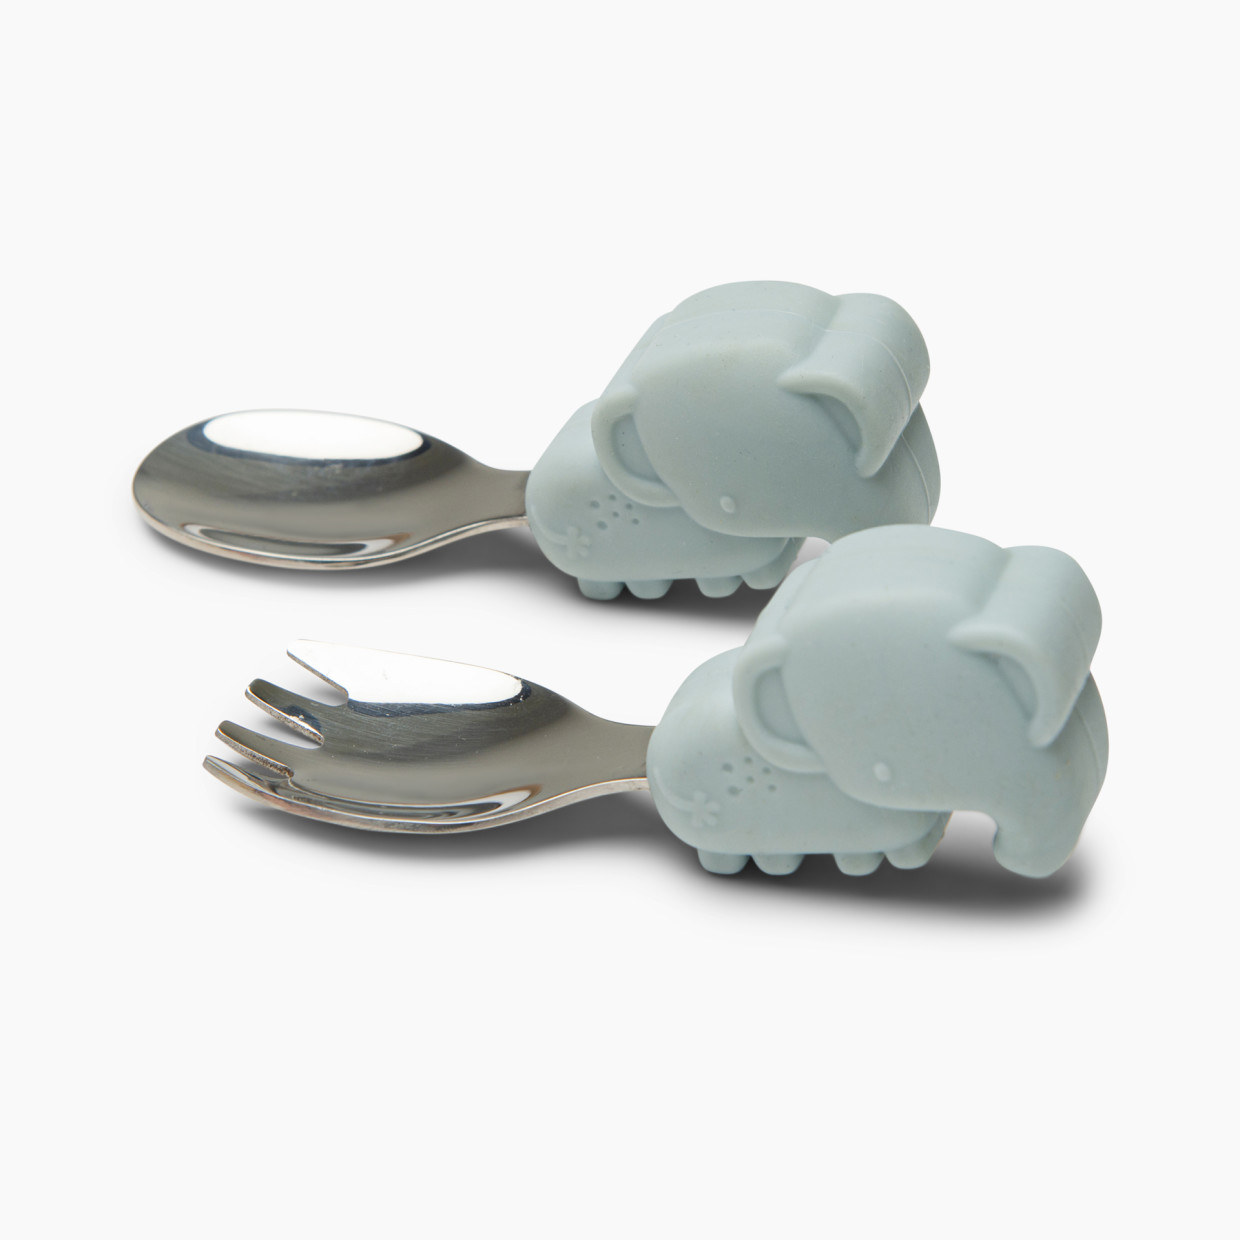 Loulou Lollipop Born to be Wild Learning Spoon and Fork Set - Elephant.